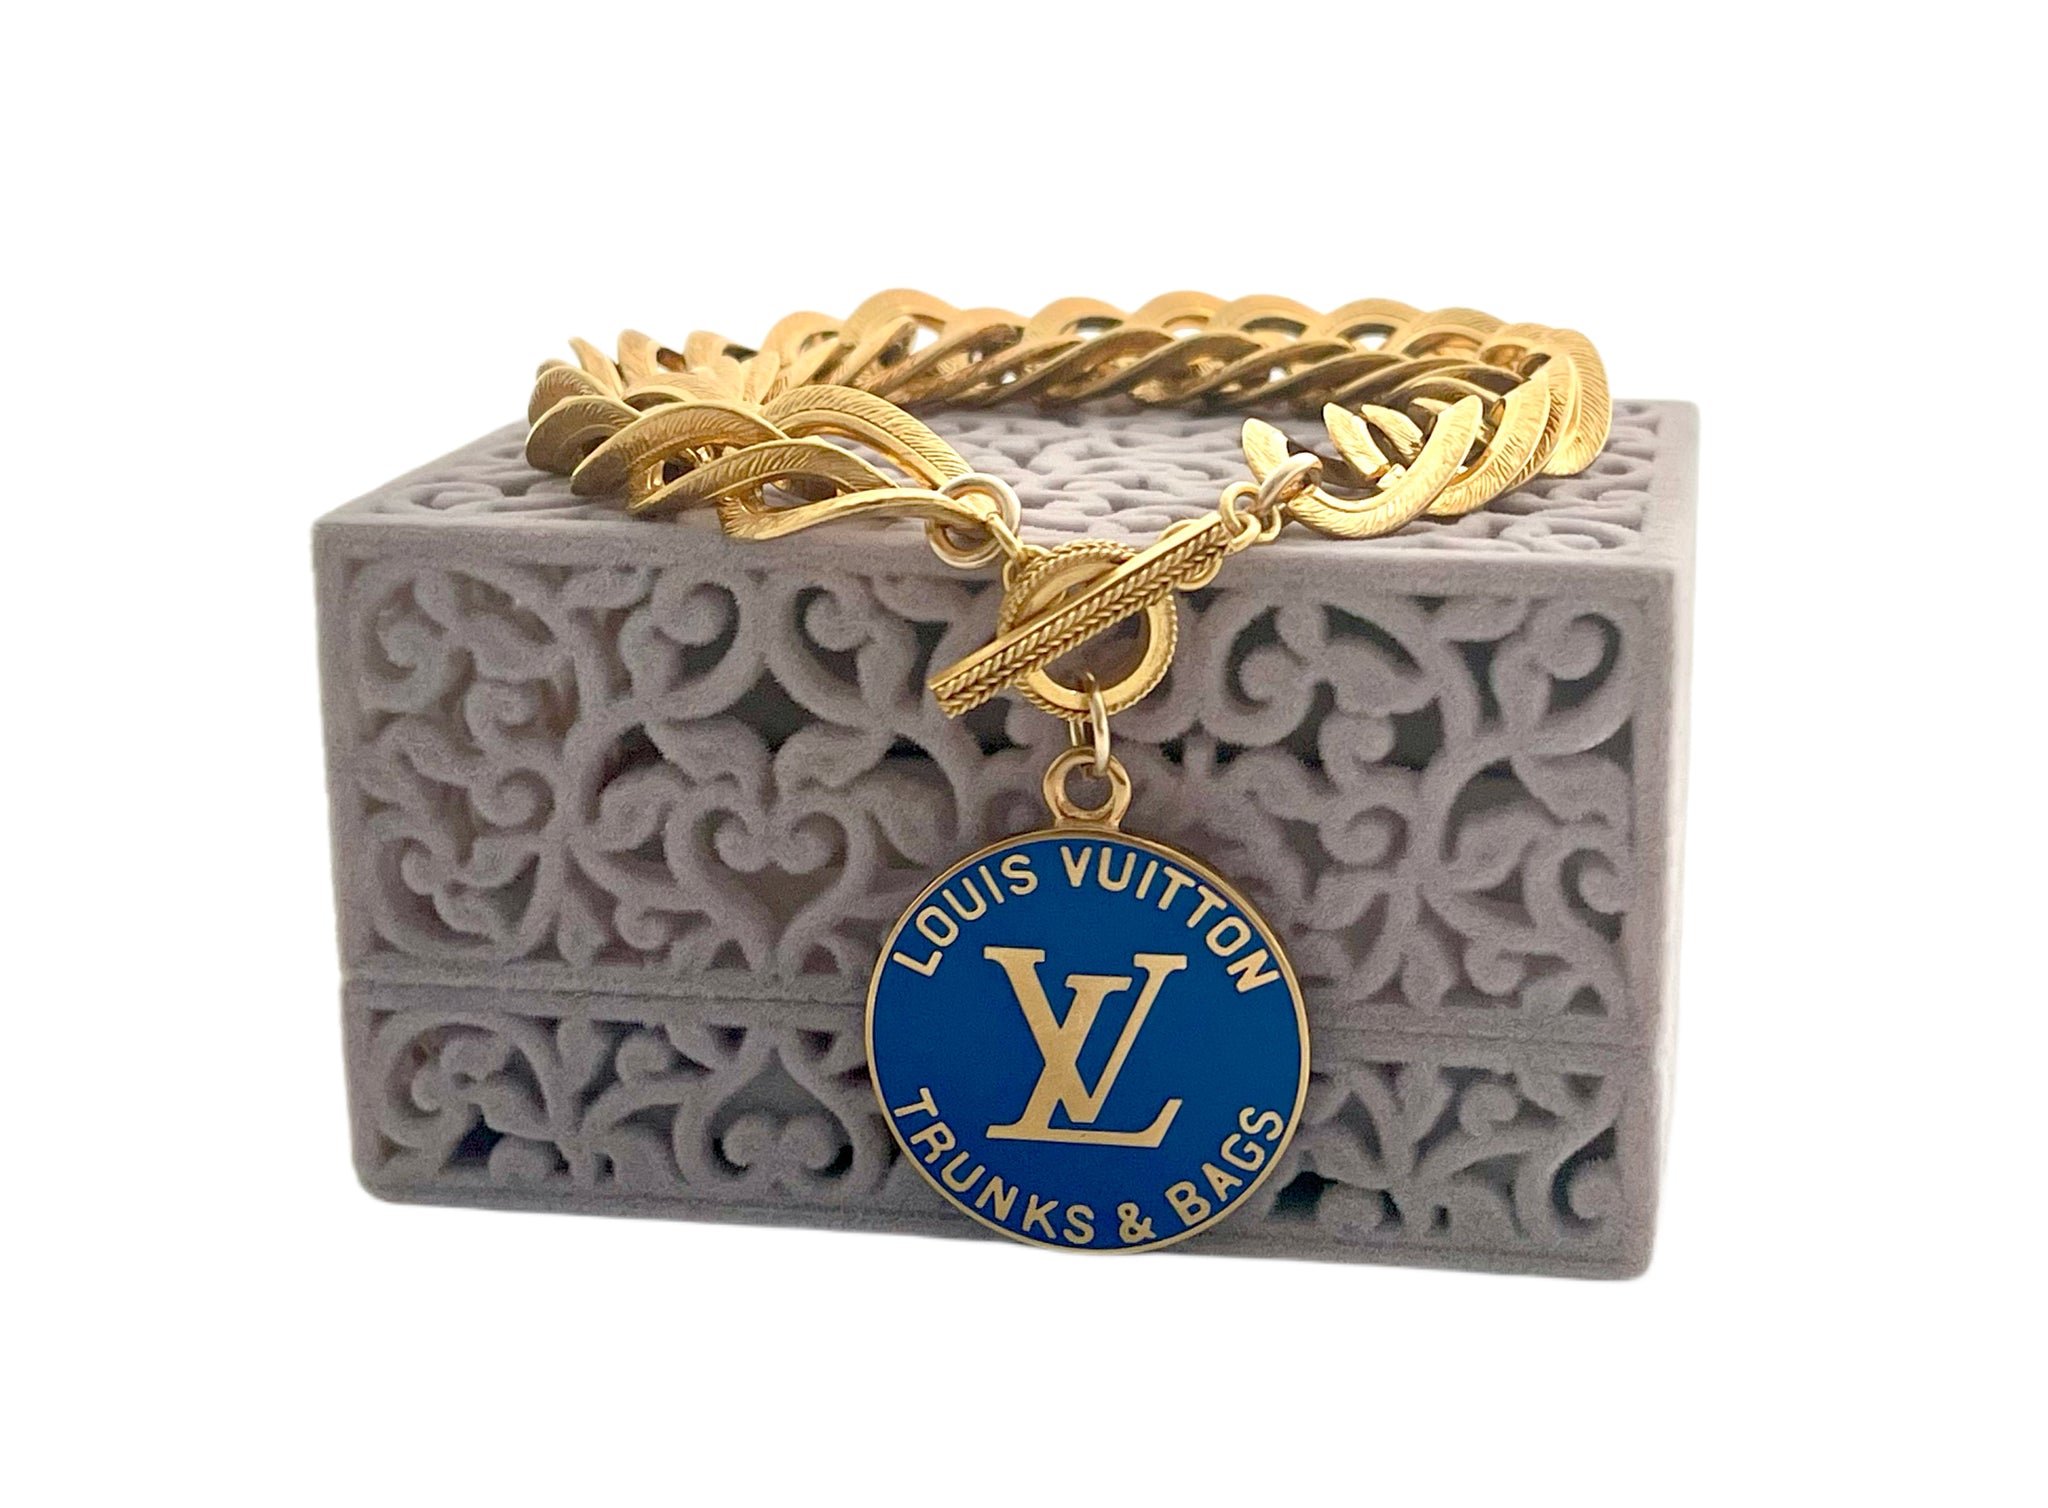 Louis Vuitton - Authenticated Bag Charm - Metal Multicolour for Women, Very Good Condition